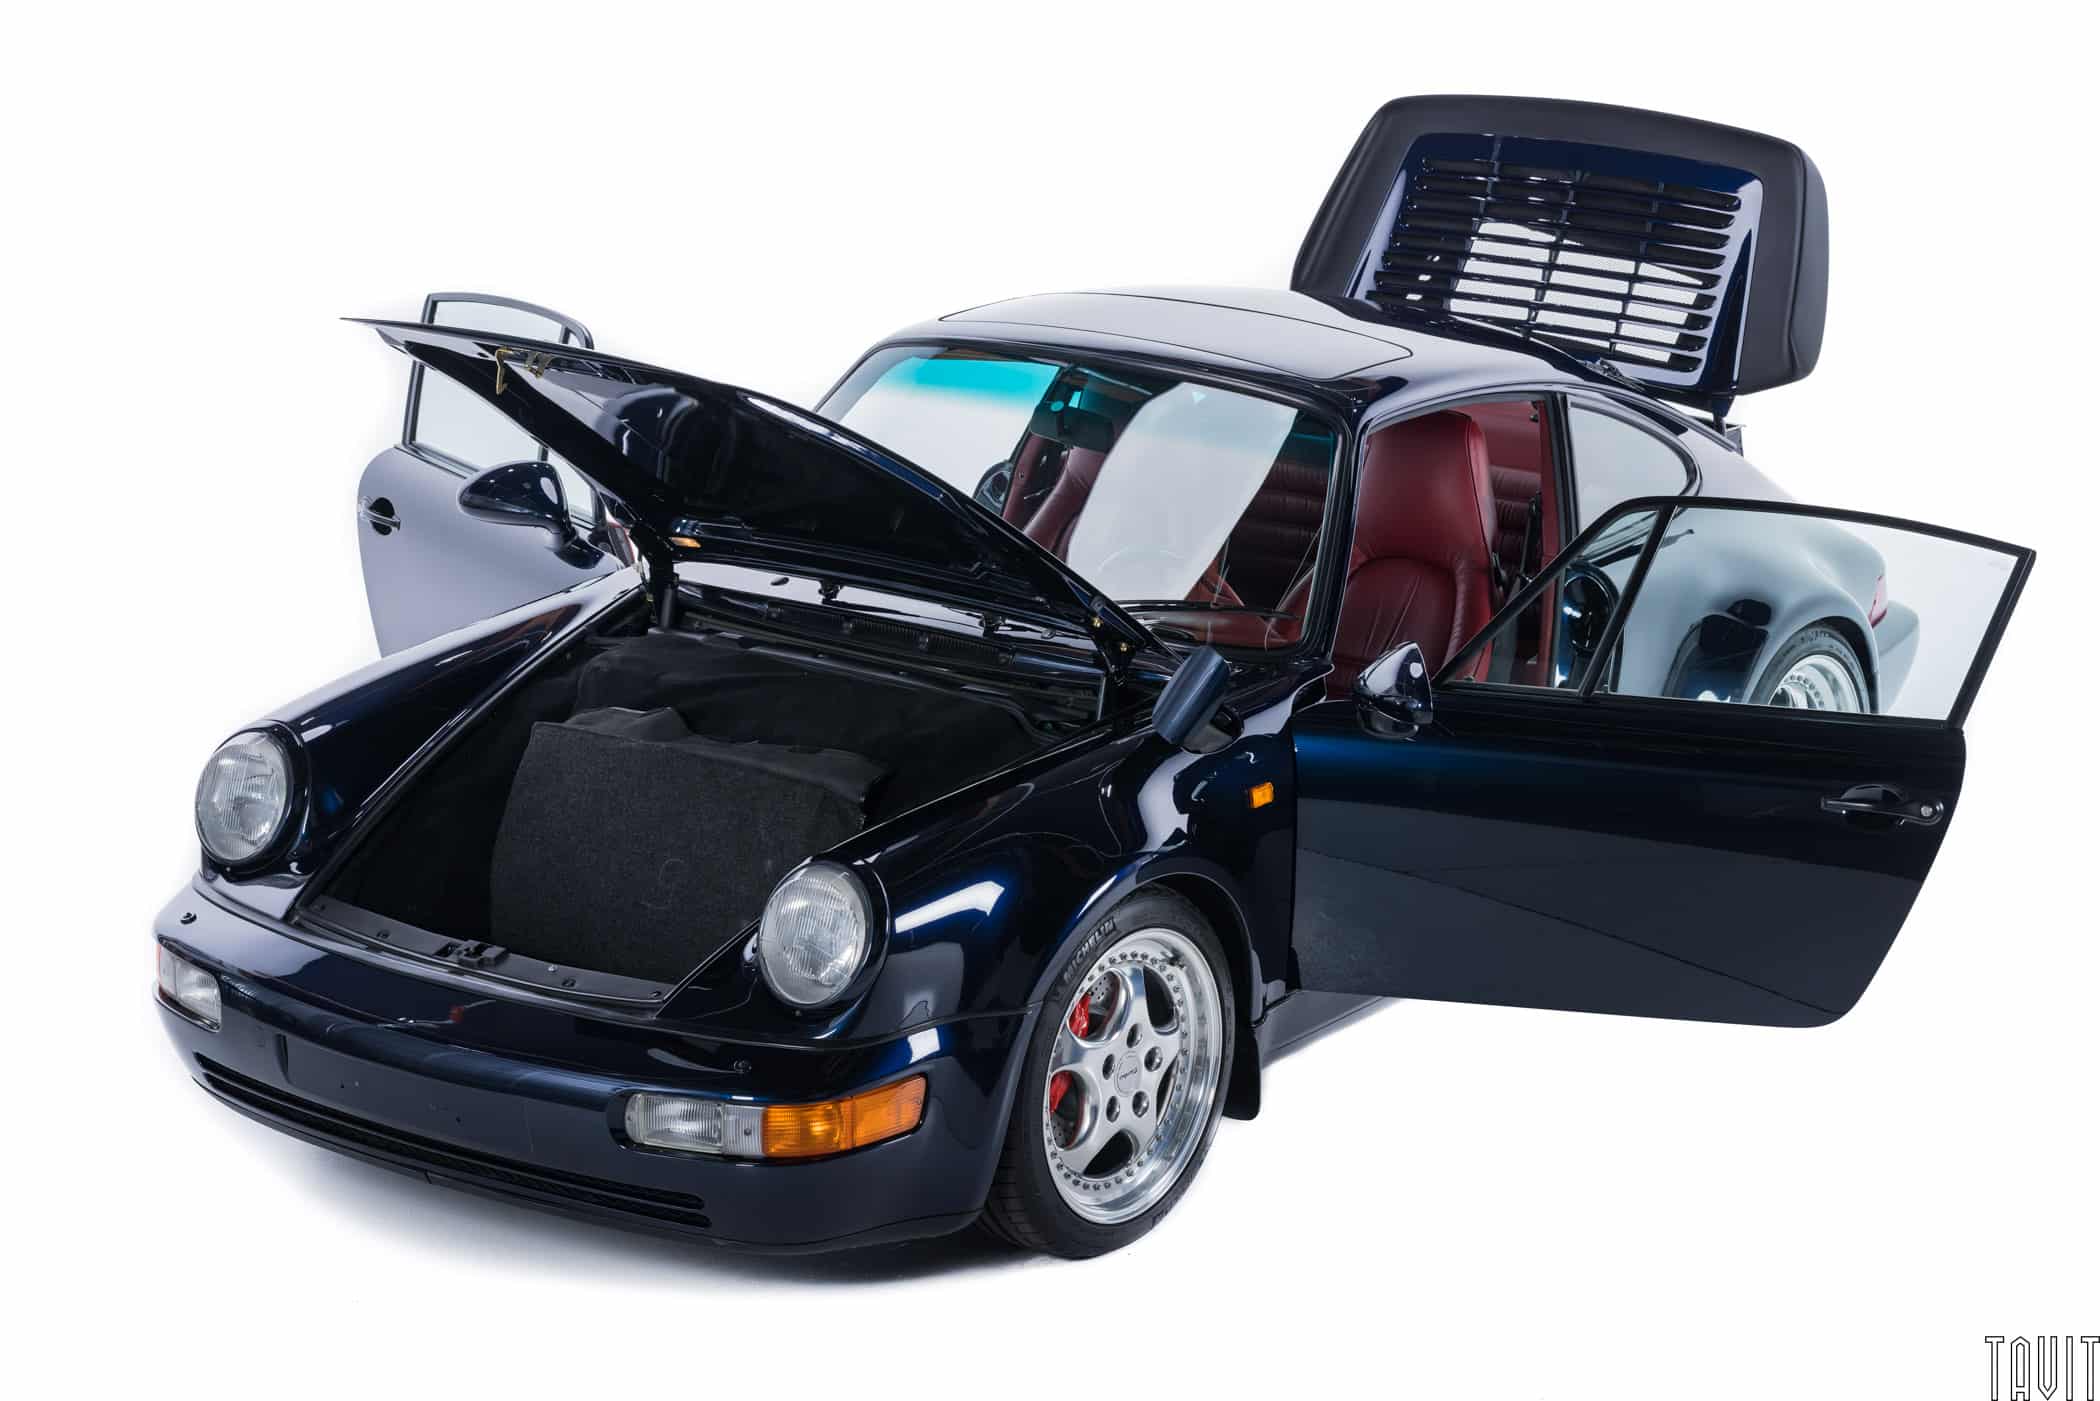 commercial shot of black porche with all doors and lids open